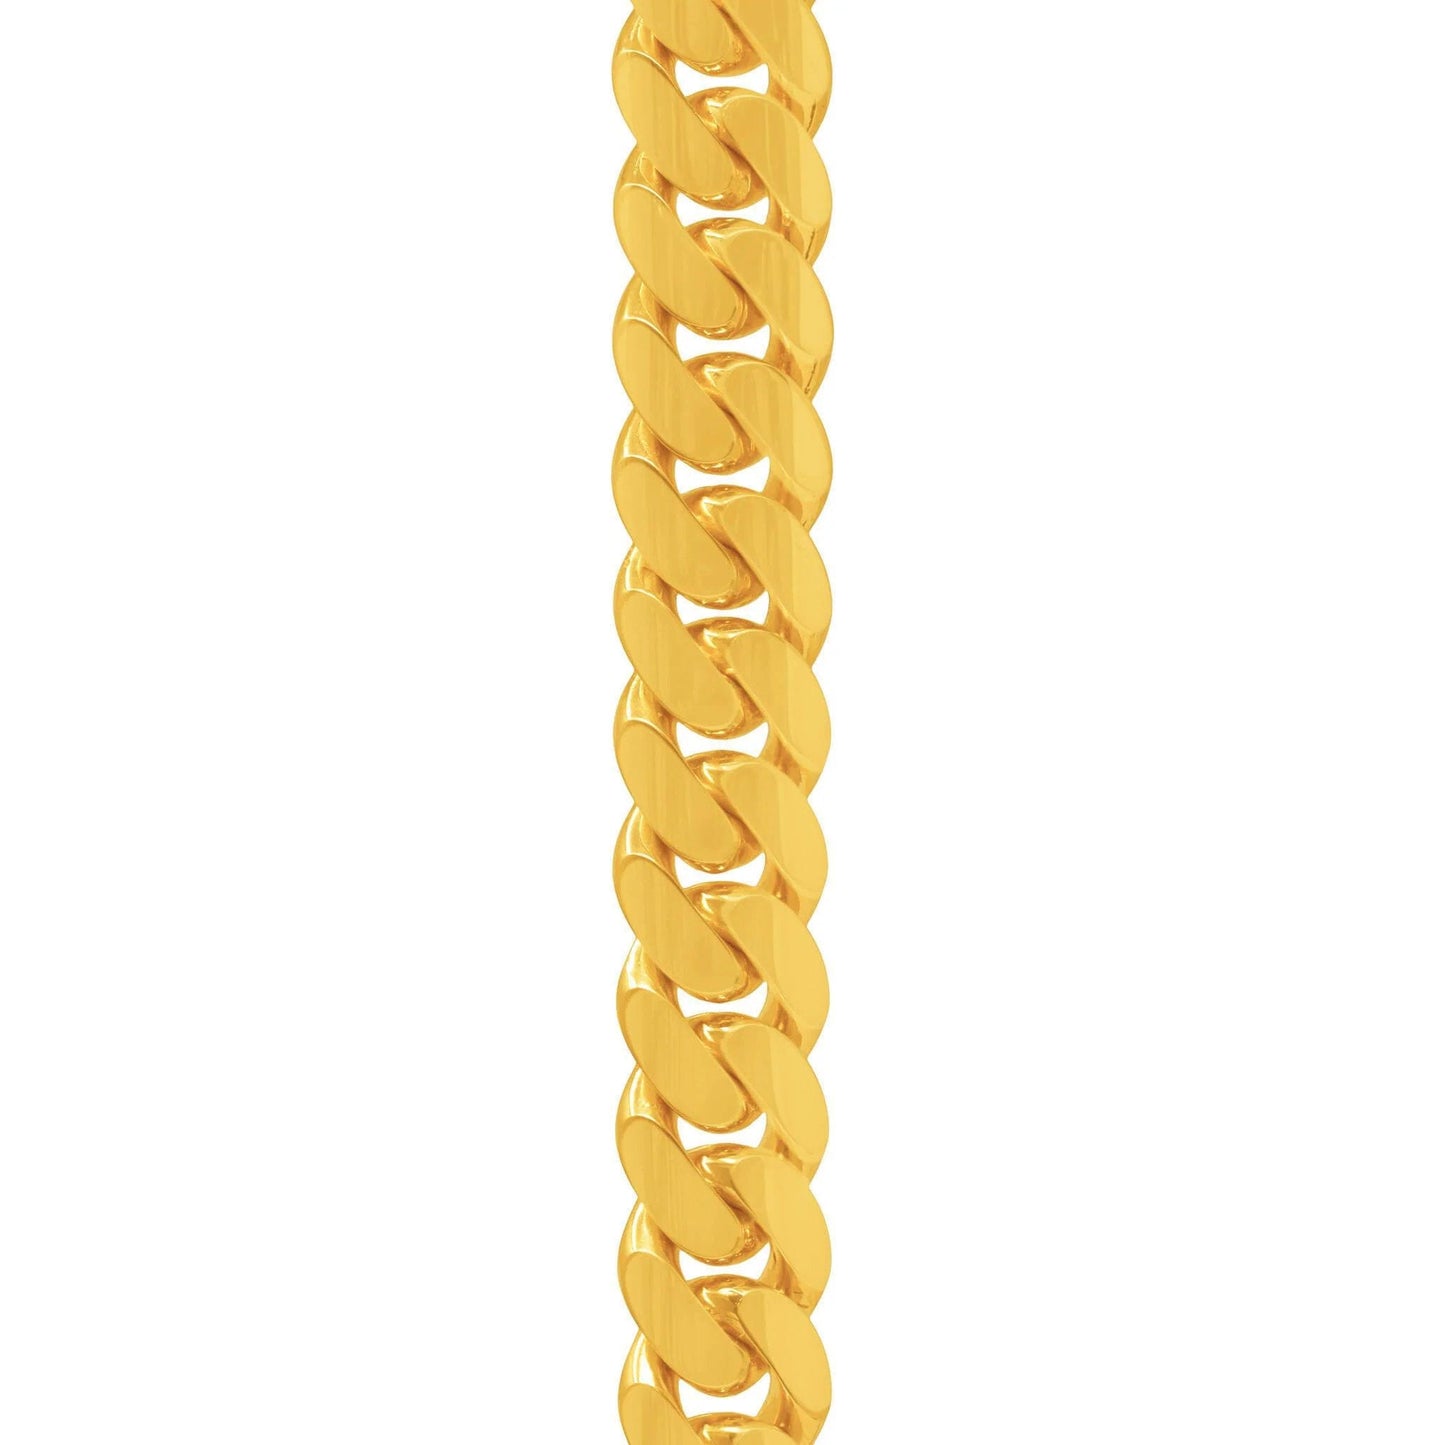 18mm Miami Cuban Link Bracelet in 10K Solid Yellow Gold - Vera Jewelry in Miami